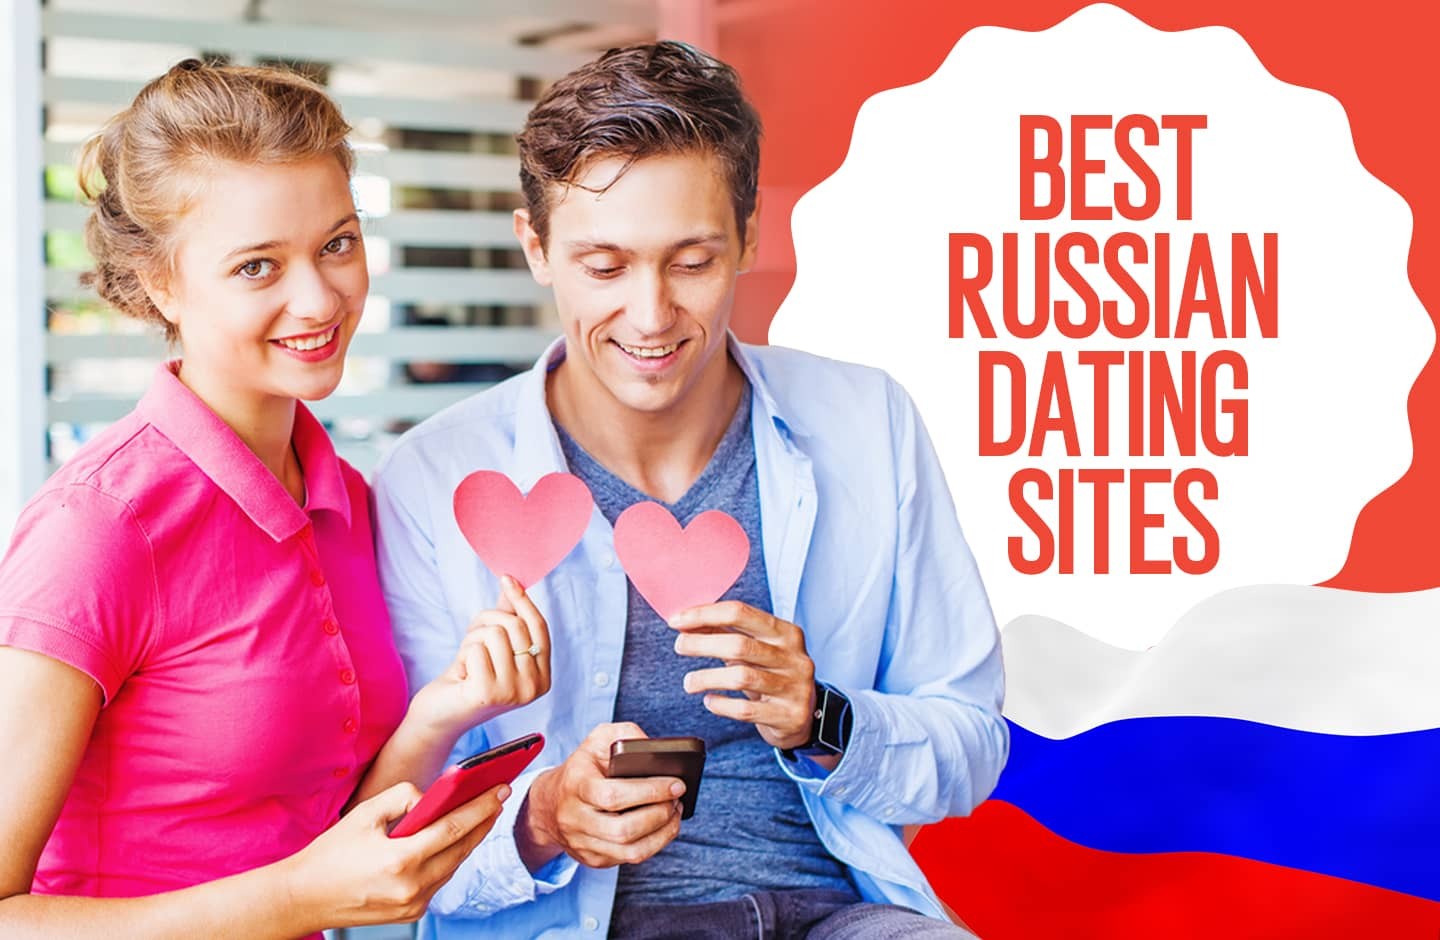 Anonymous dating app in St. Petersburg